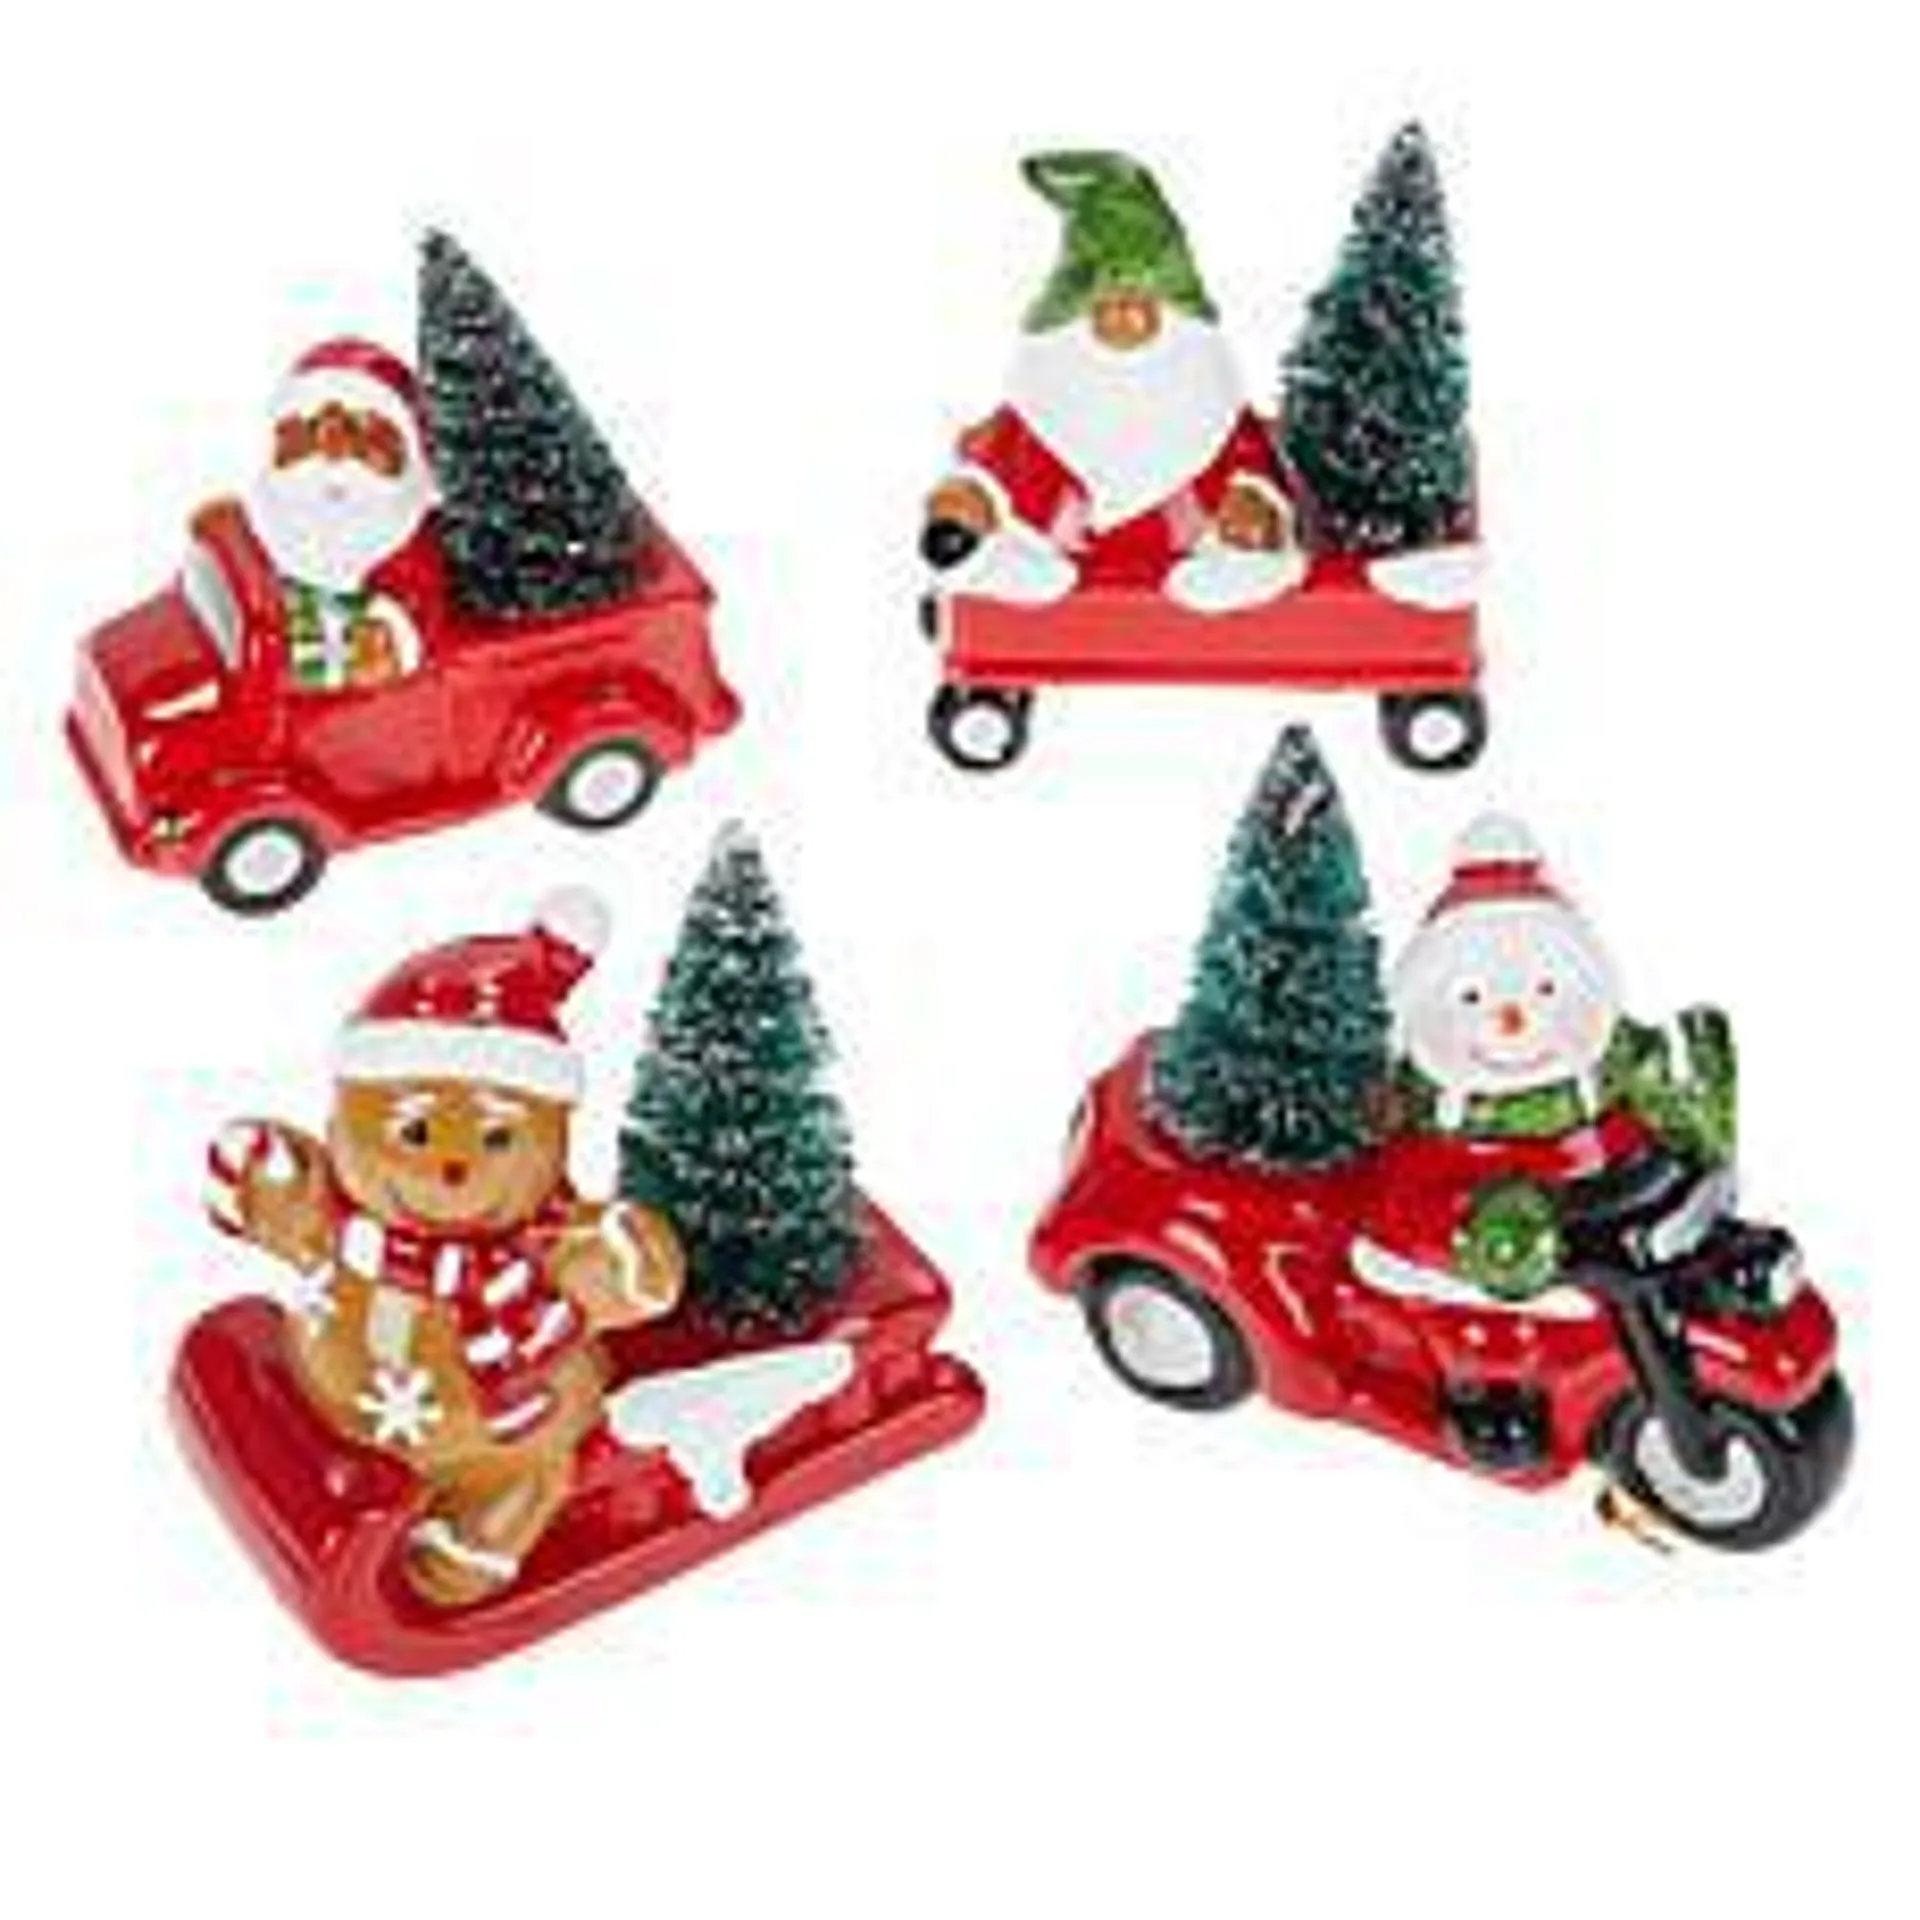 Mr. Christmas Vehicle Tree Ornaments with Gift Bags